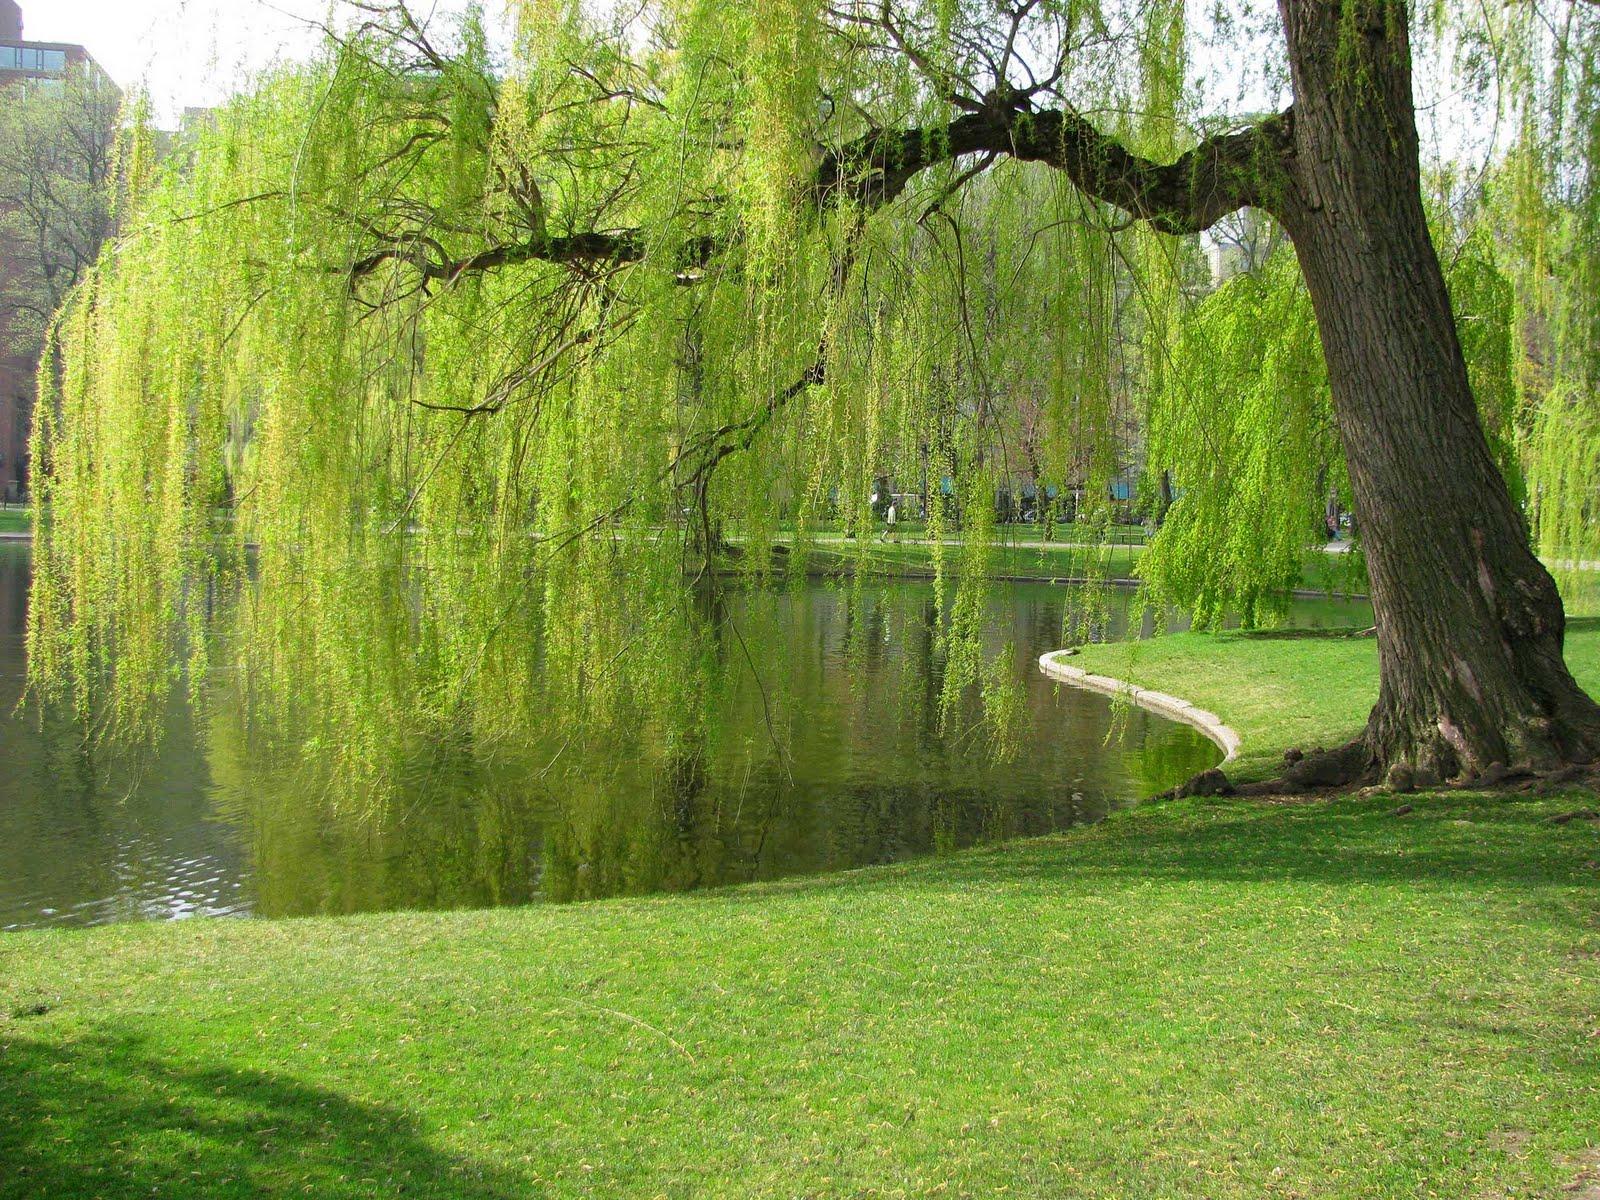 Willow Tree Background